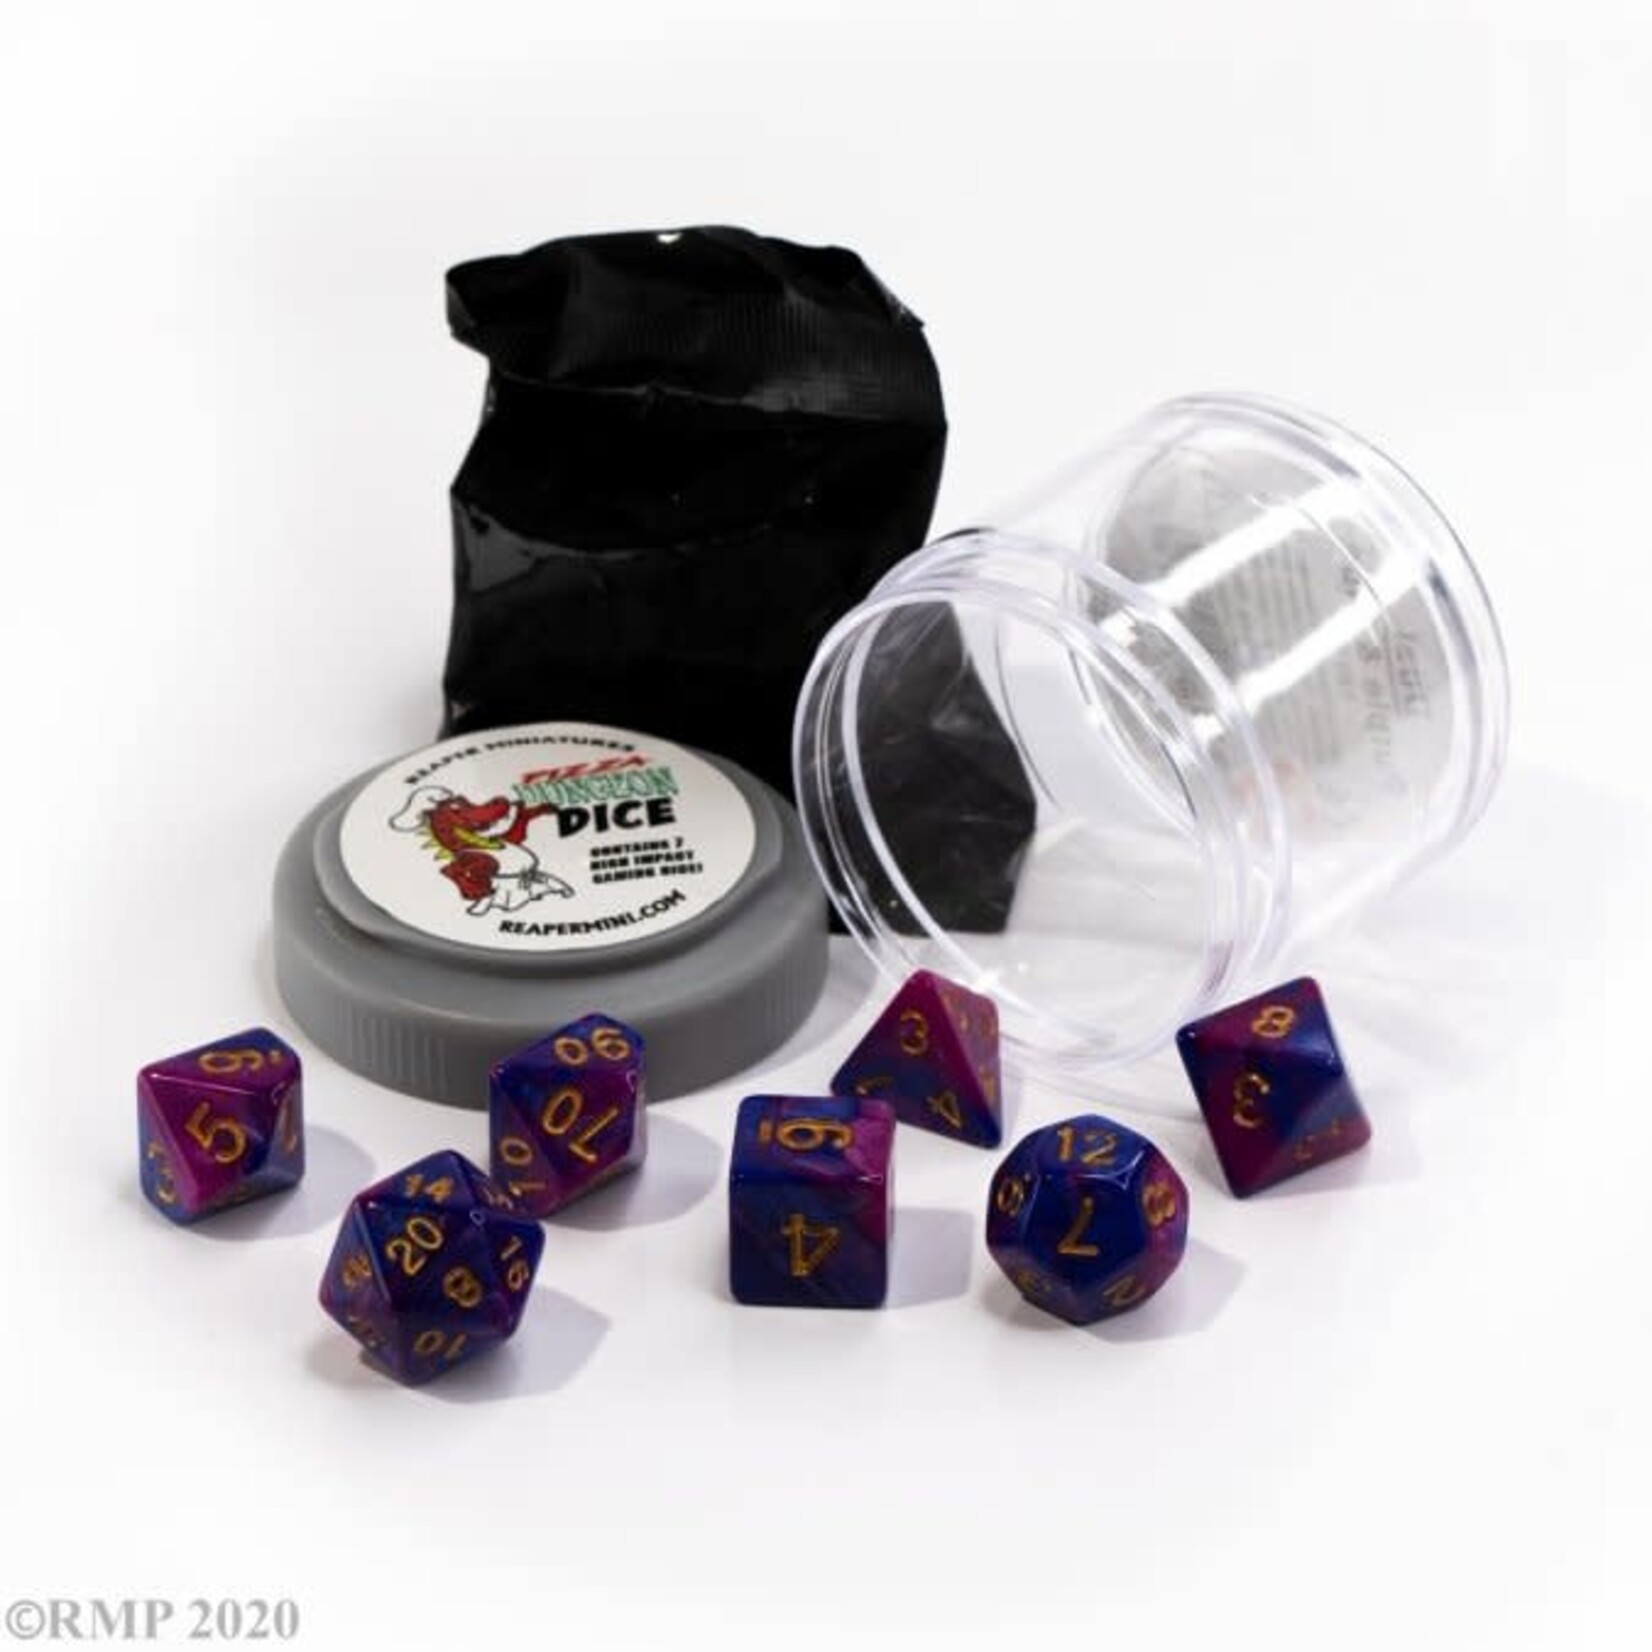 Reaper Miniatures Dual Dice - Purple and Blue